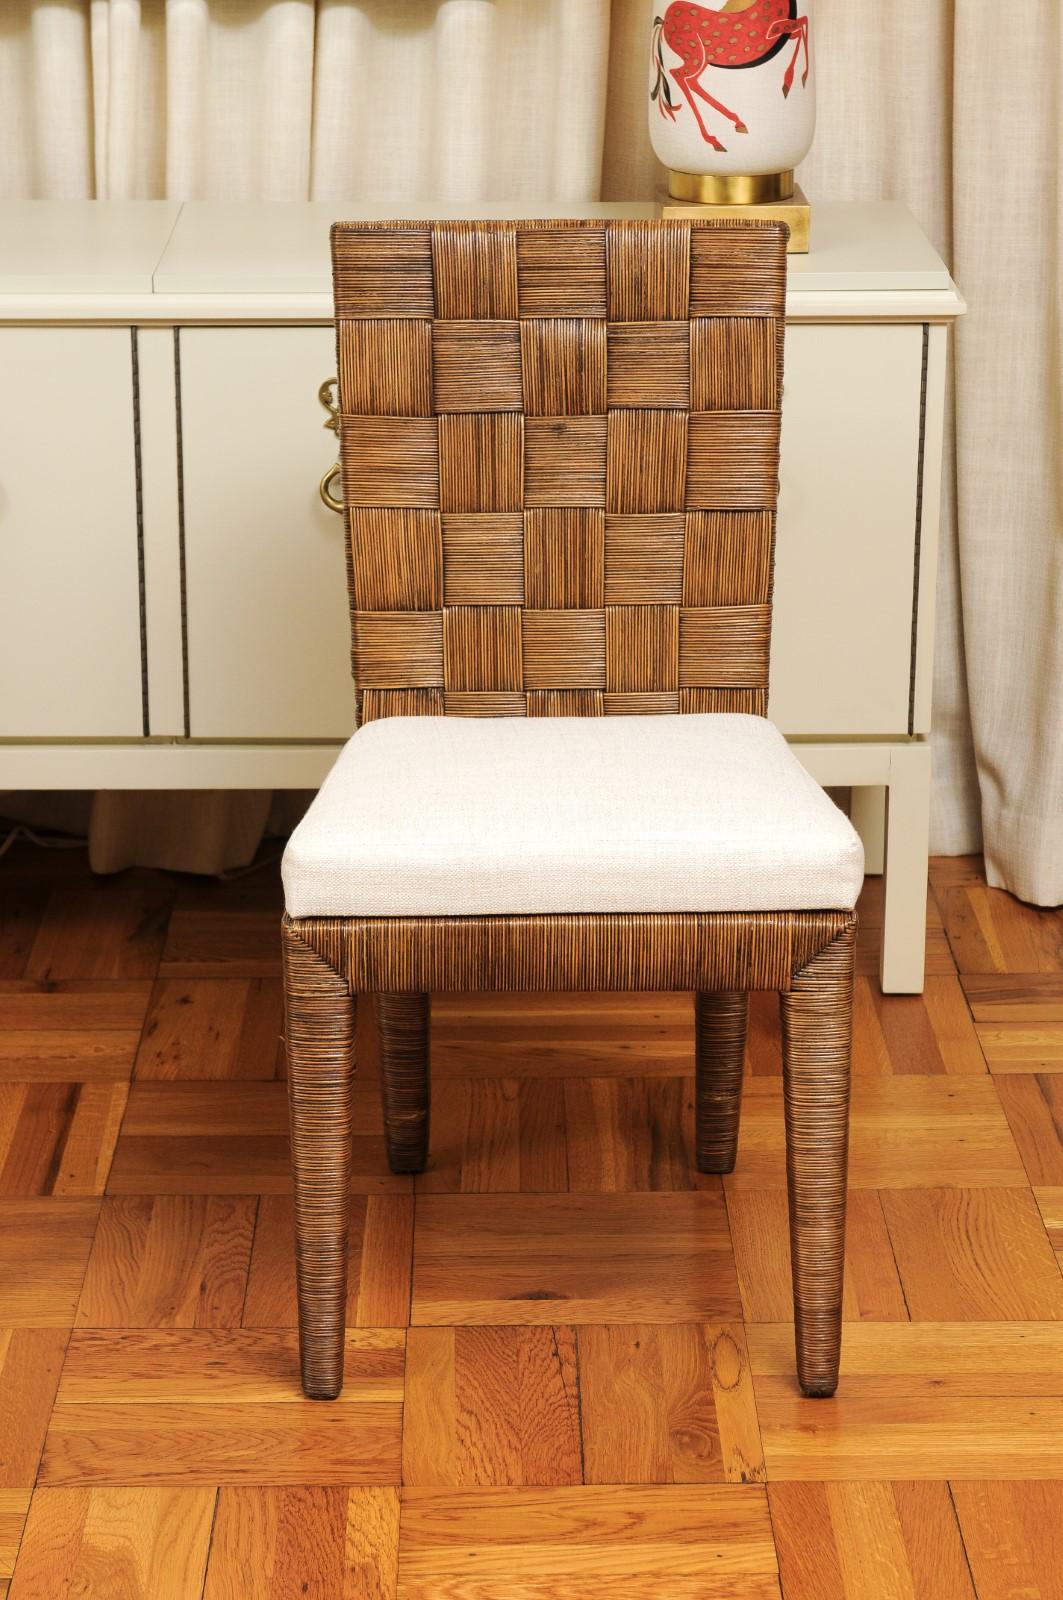 Stellar Set of 12 Vintage Block Island Cane Chairs by John Hutton for Donghia In Excellent Condition For Sale In Atlanta, GA